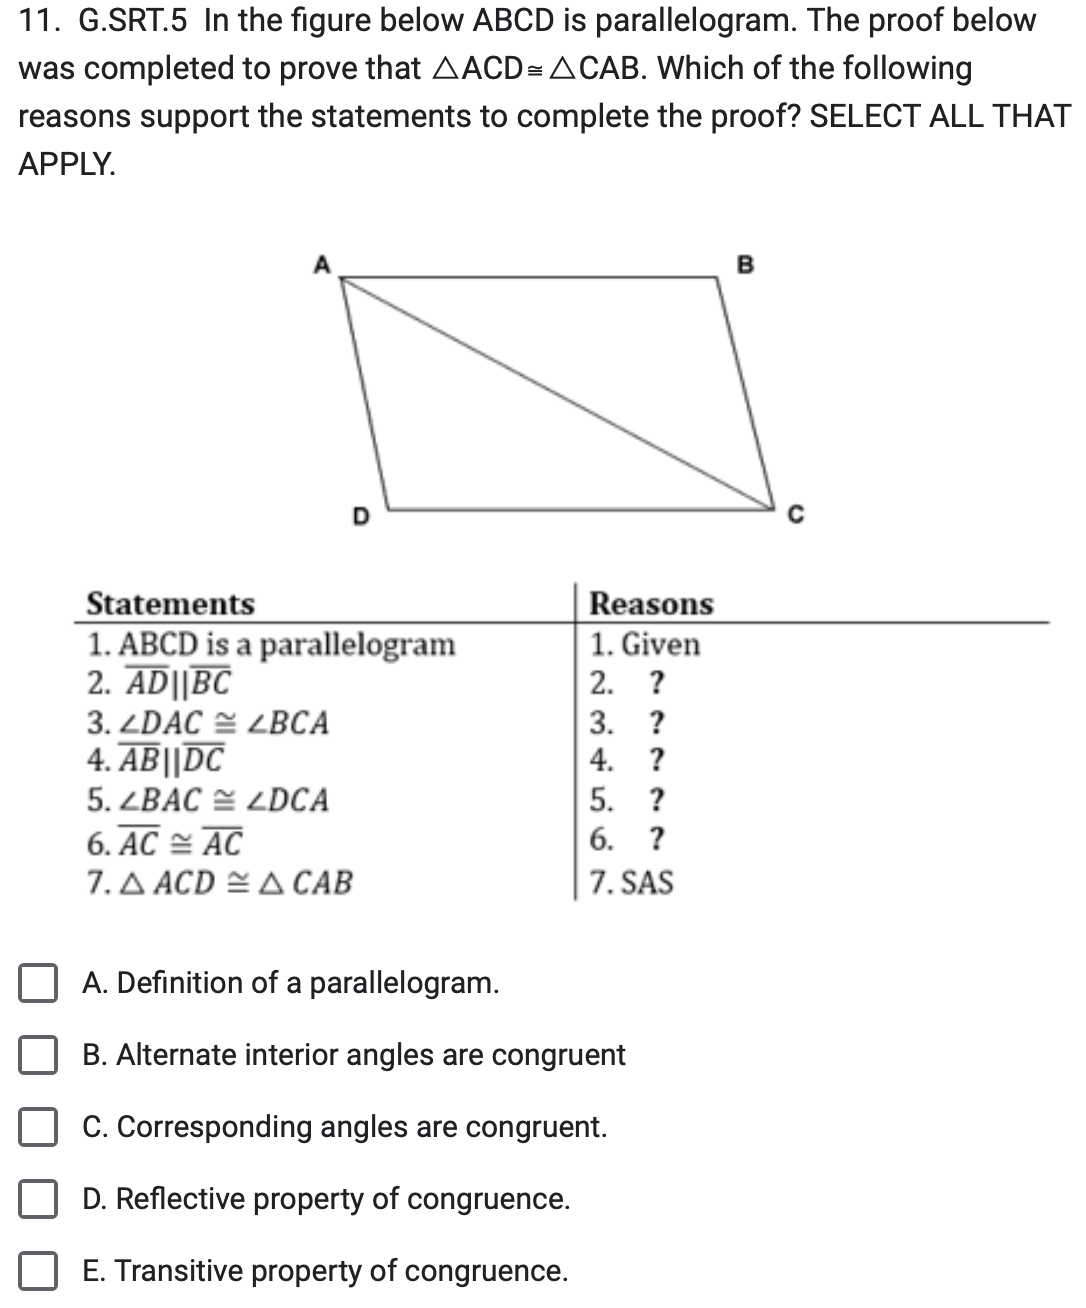 11. G.SRT.5 In the figure below ABCD is parallelogram. The proof below
was completed to prove that AACD= ACAB. Which of the following
reasons support the statements to complete the proof? SELECT ALL THAT
APPLY.
Statements
1. ABCD is a parallelogram
2. AD||BC
3. ZDAC ZBCA
4. AB||DC
5. ZBAC LDCA
6. AC AC
7. AACDA CAB
Reasons
1. Given
2. ?
3.
4.
?
?
5. ?
6. ?
7. SAS
A. Definition of a parallelogram.
B. Alternate interior angles are congruent
C. Corresponding angles are congruent.
D. Reflective property of congruence.
E. Transitive property of congruence.
B